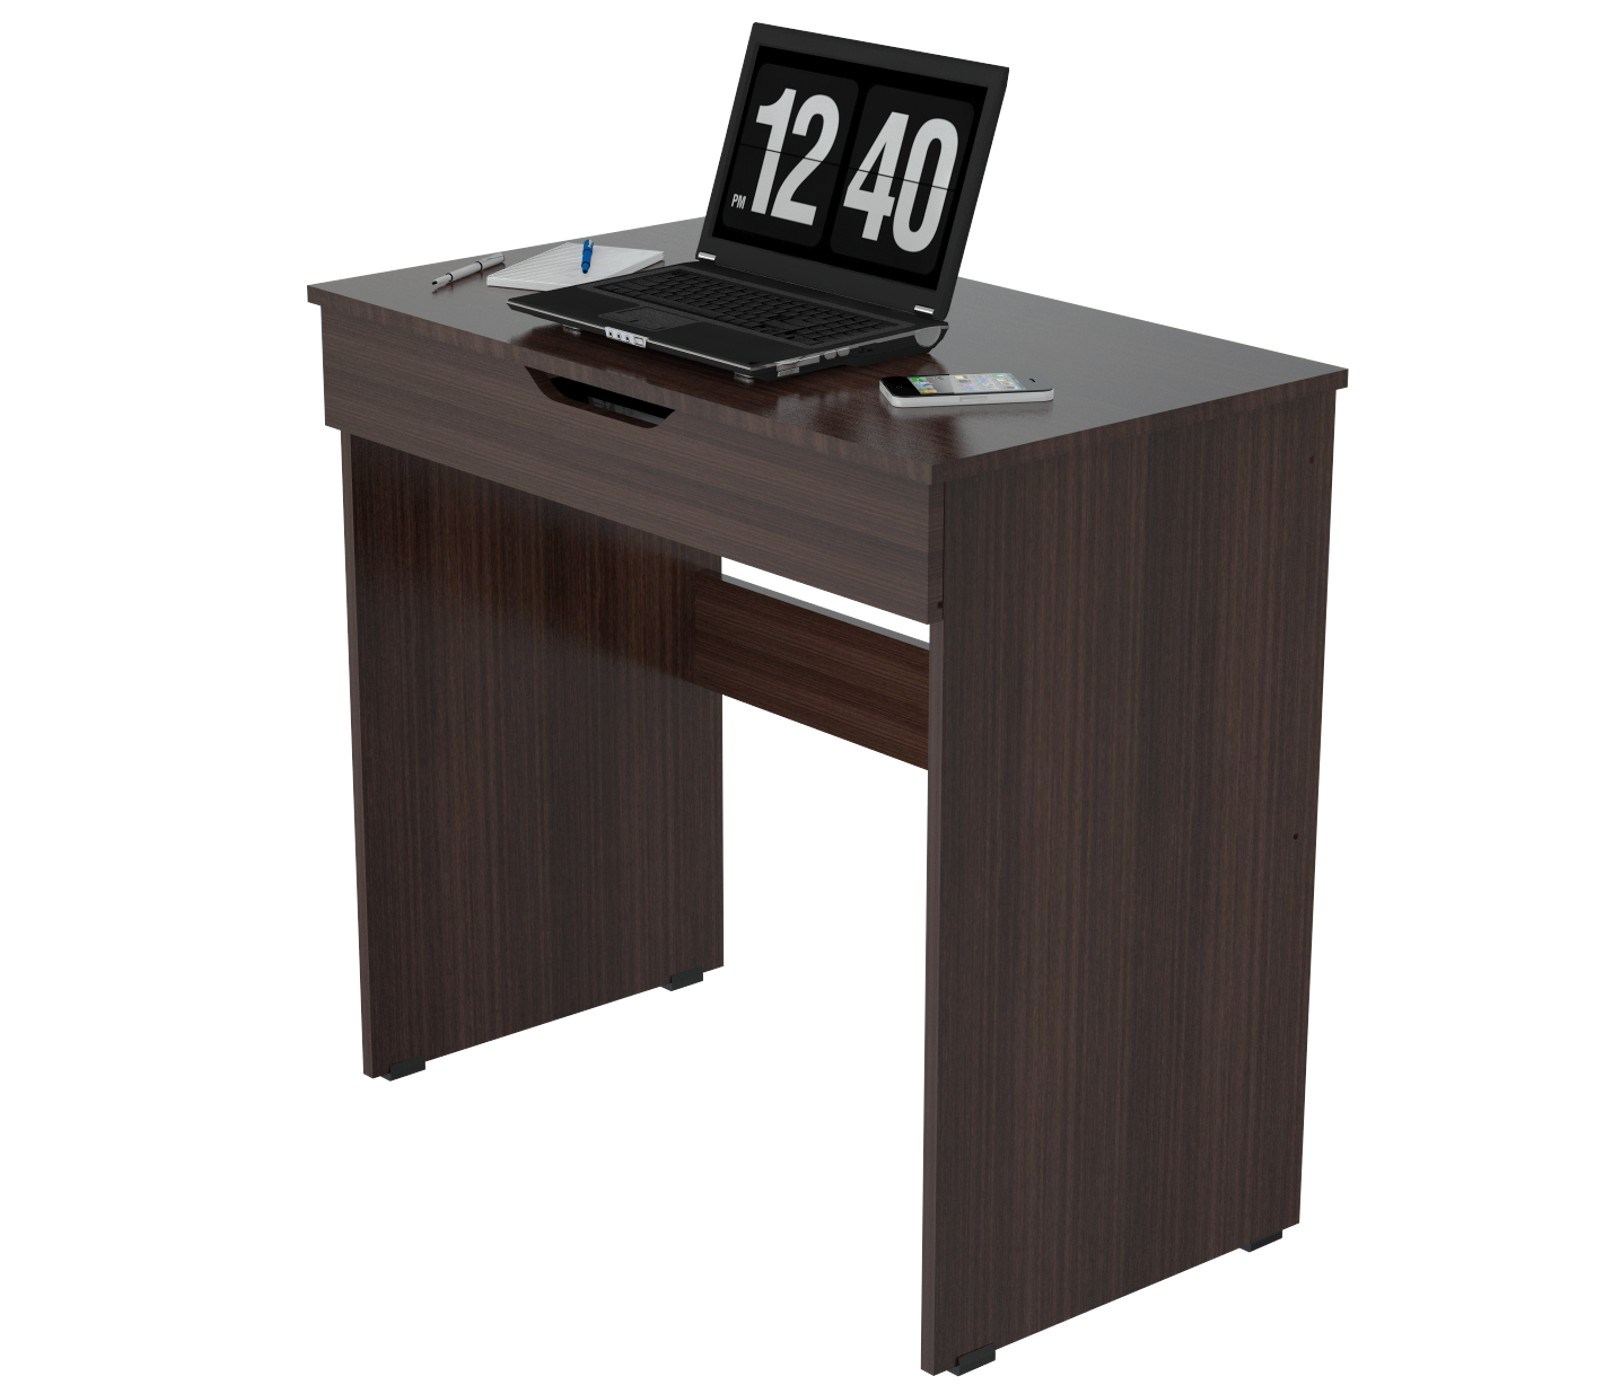 29.7" Classy Espresso Melamine and Engineered Wood Writing Desk with a Drawer